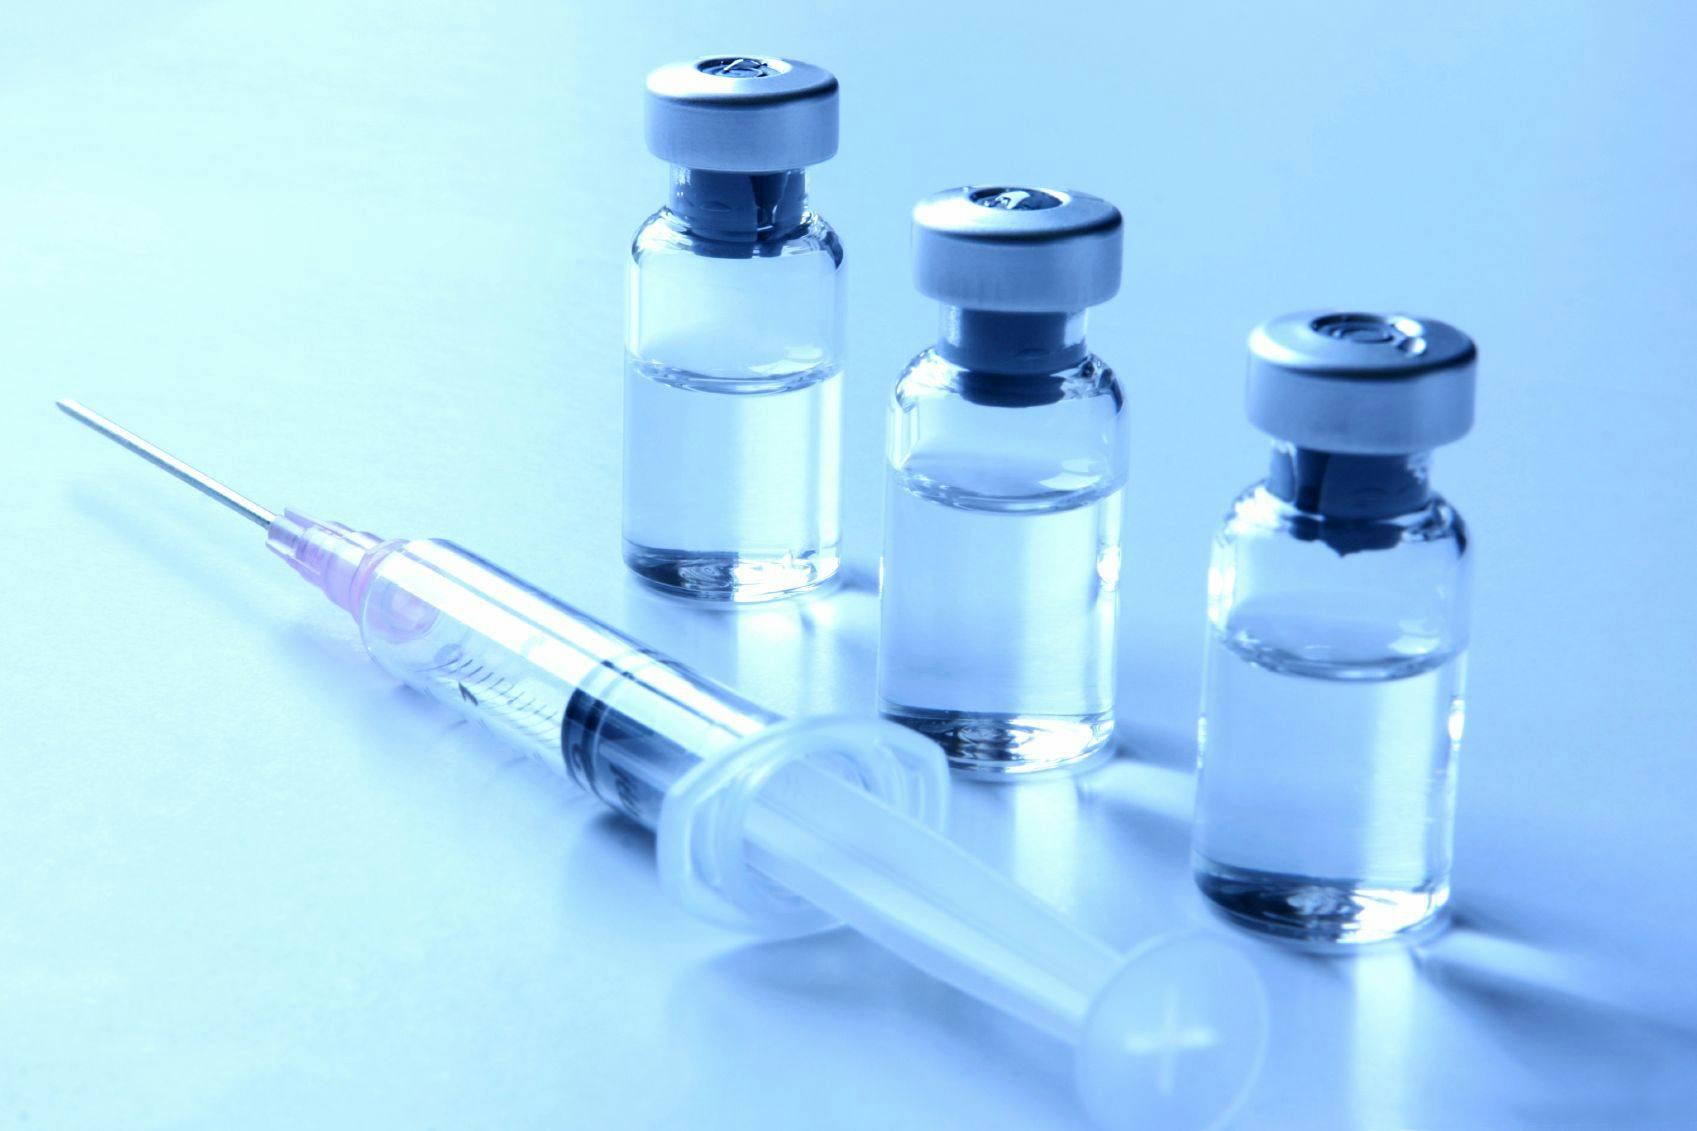 Image of three vials of treatment and a syringe.